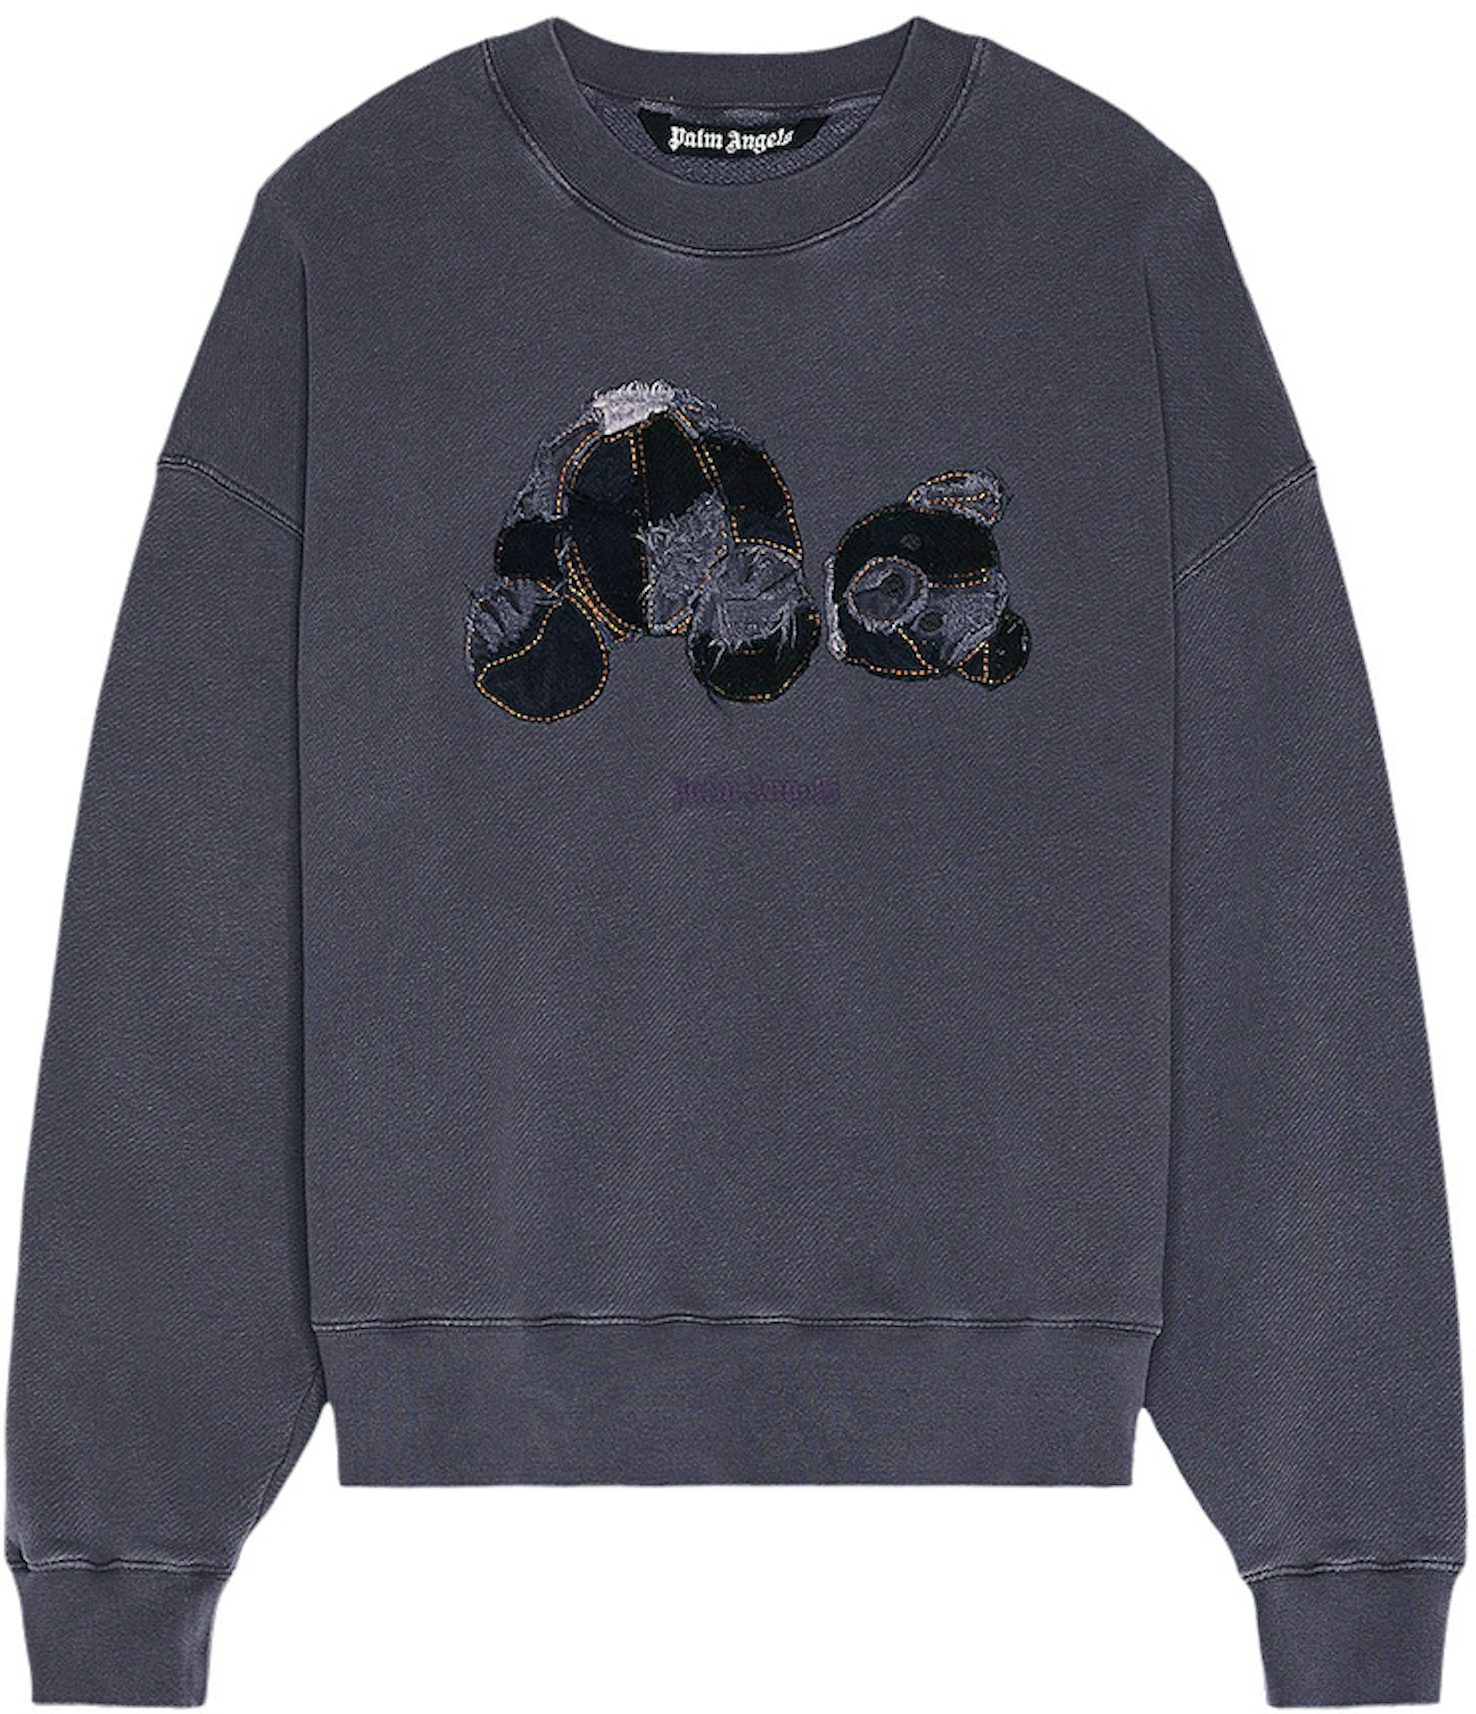 Palm Bear Fitted Crew Sweatshirt in black - Palm Angels® Official